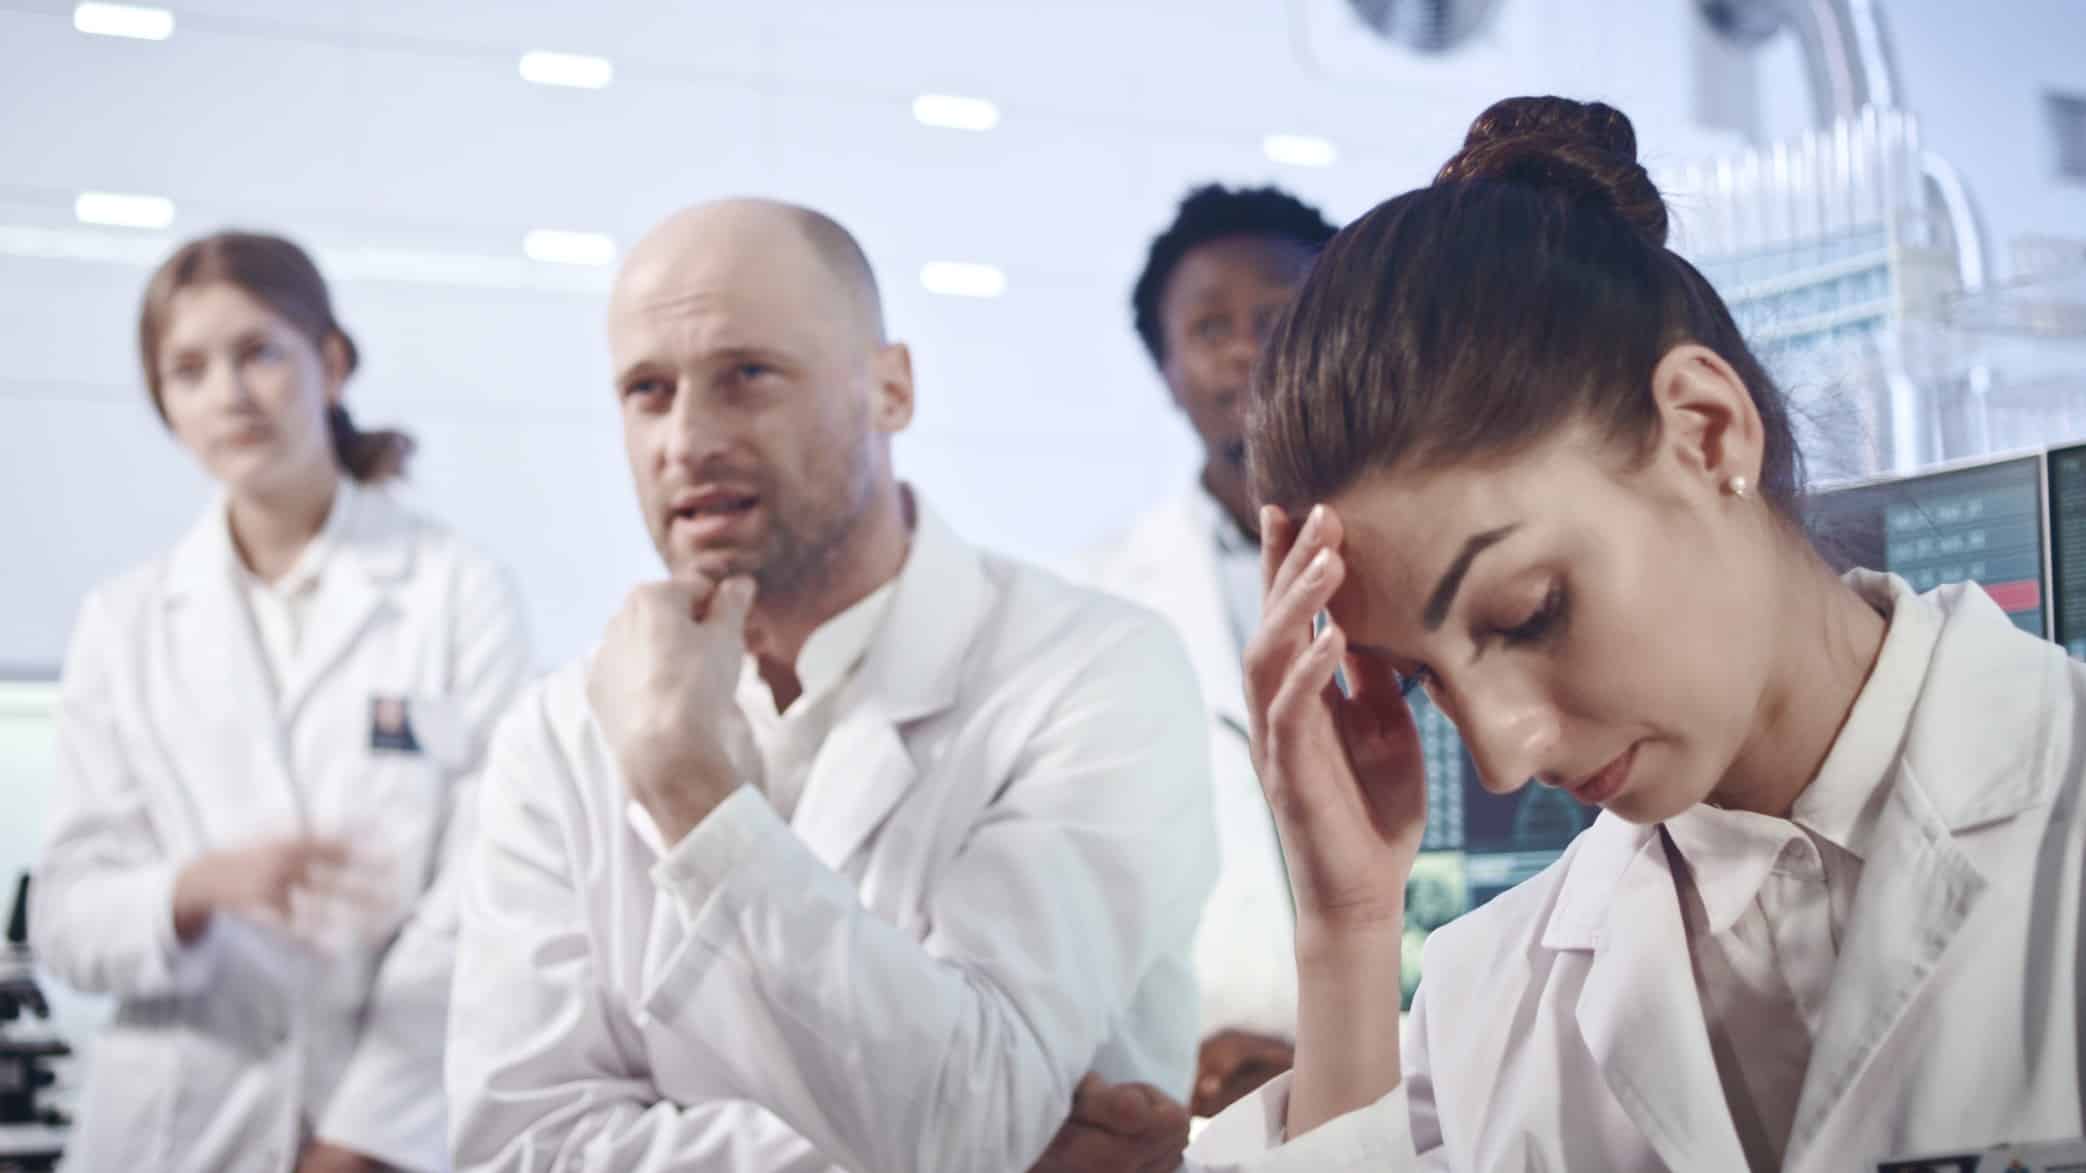 laboratory workers looking disappointed